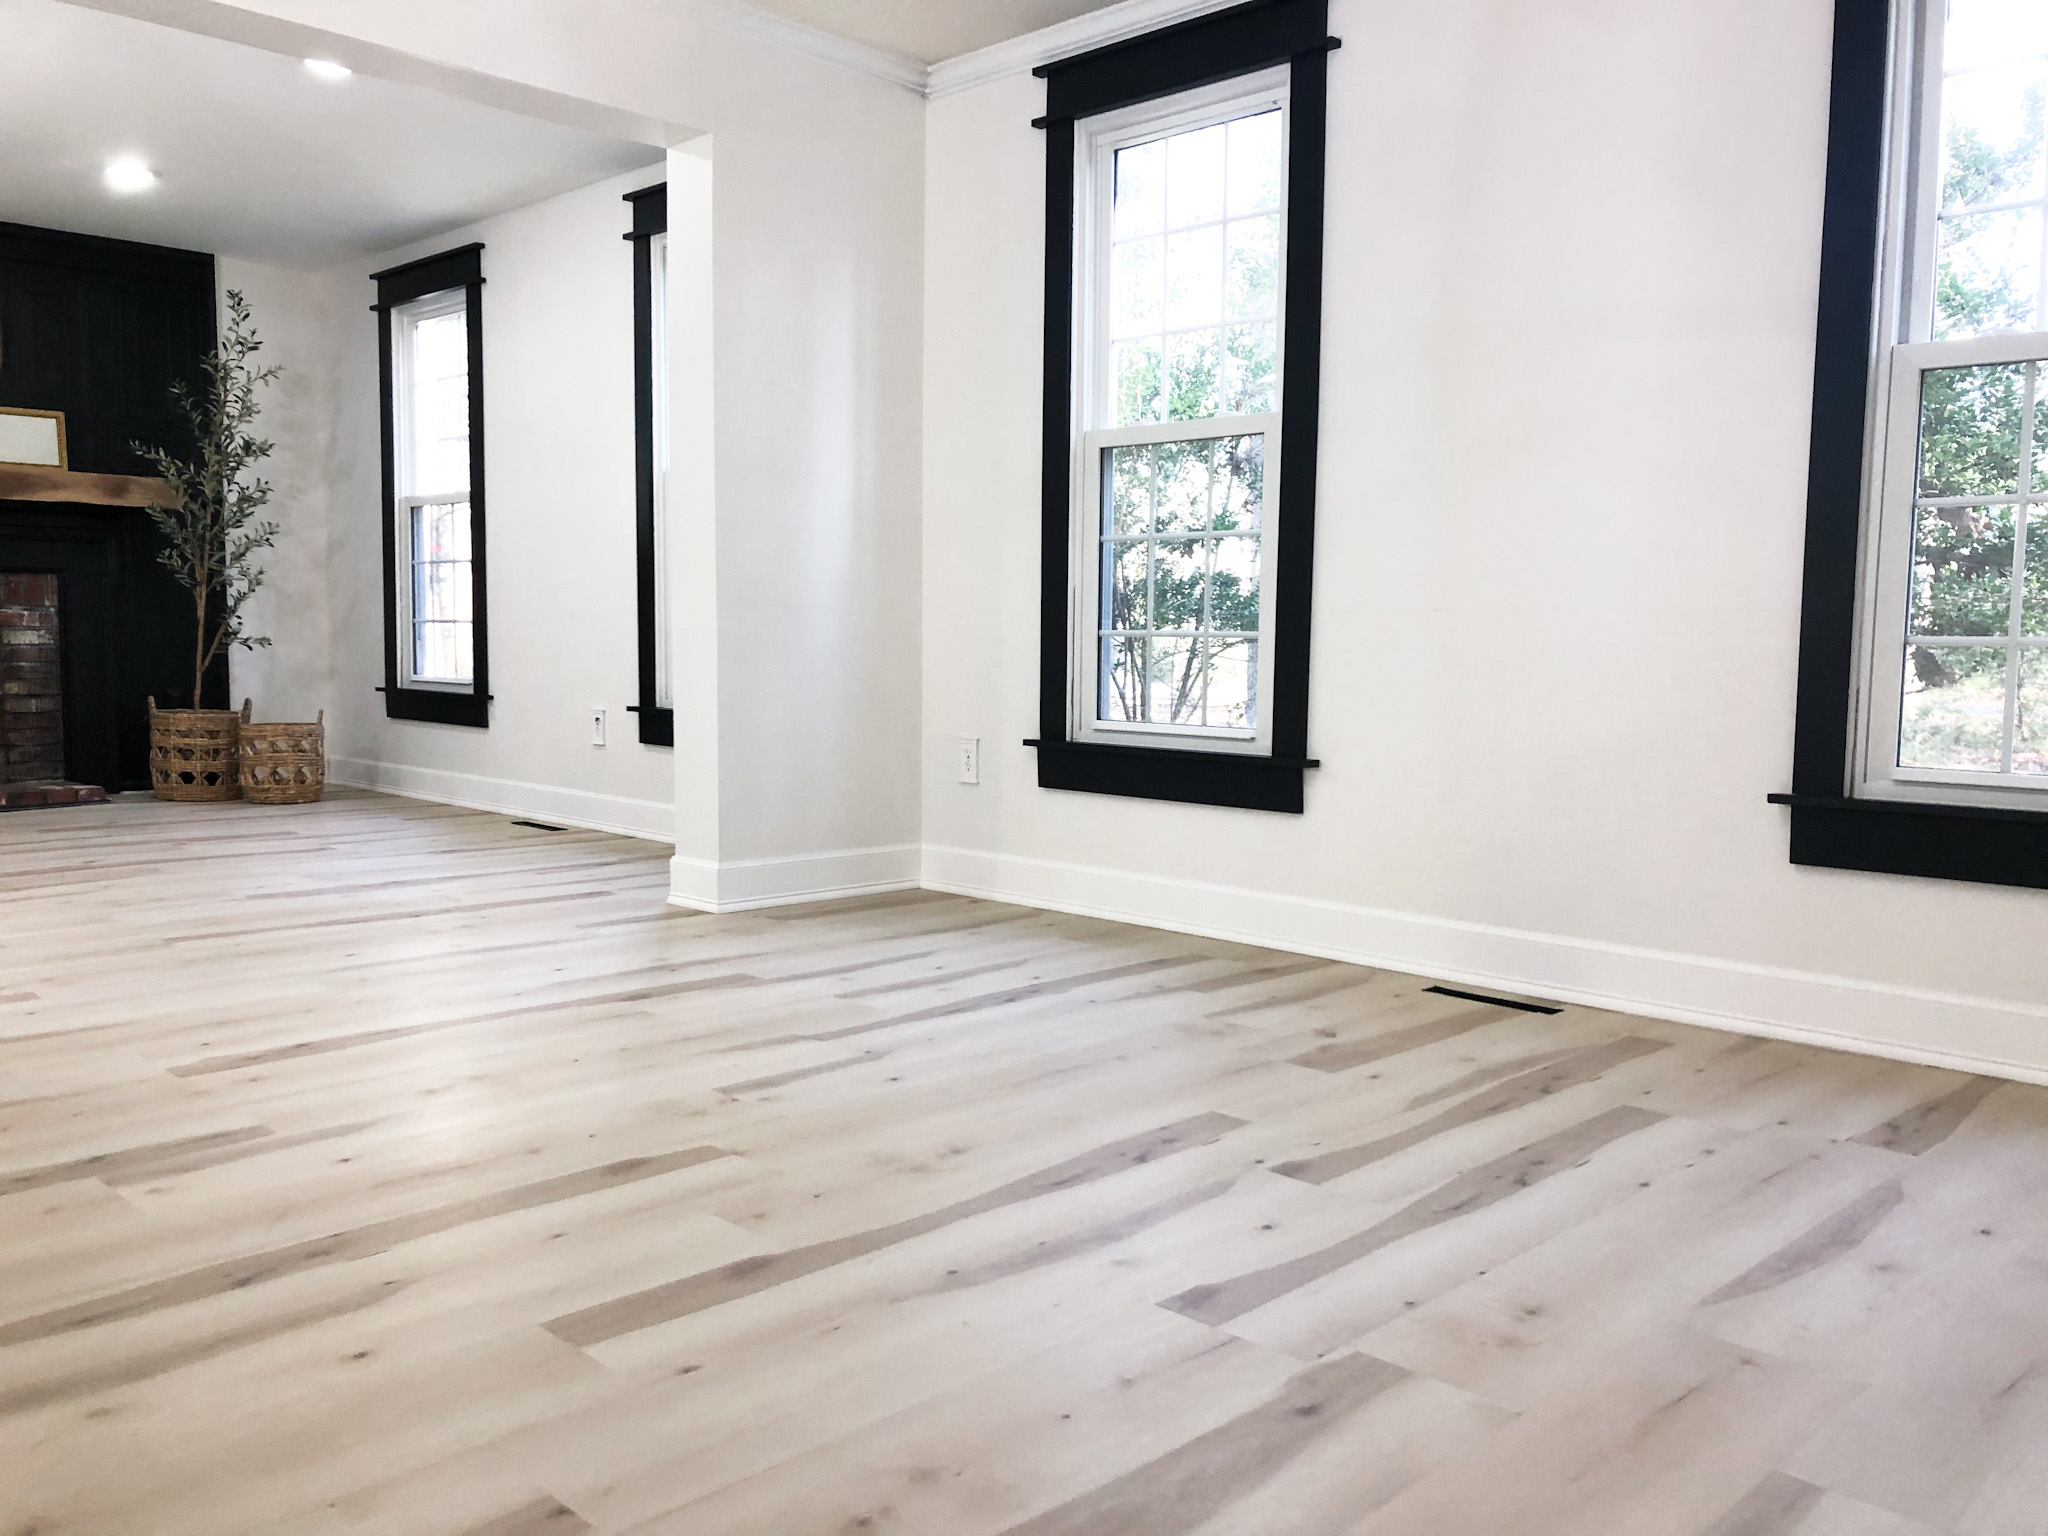 How to Clean Hardwood Floors - The Home Depot